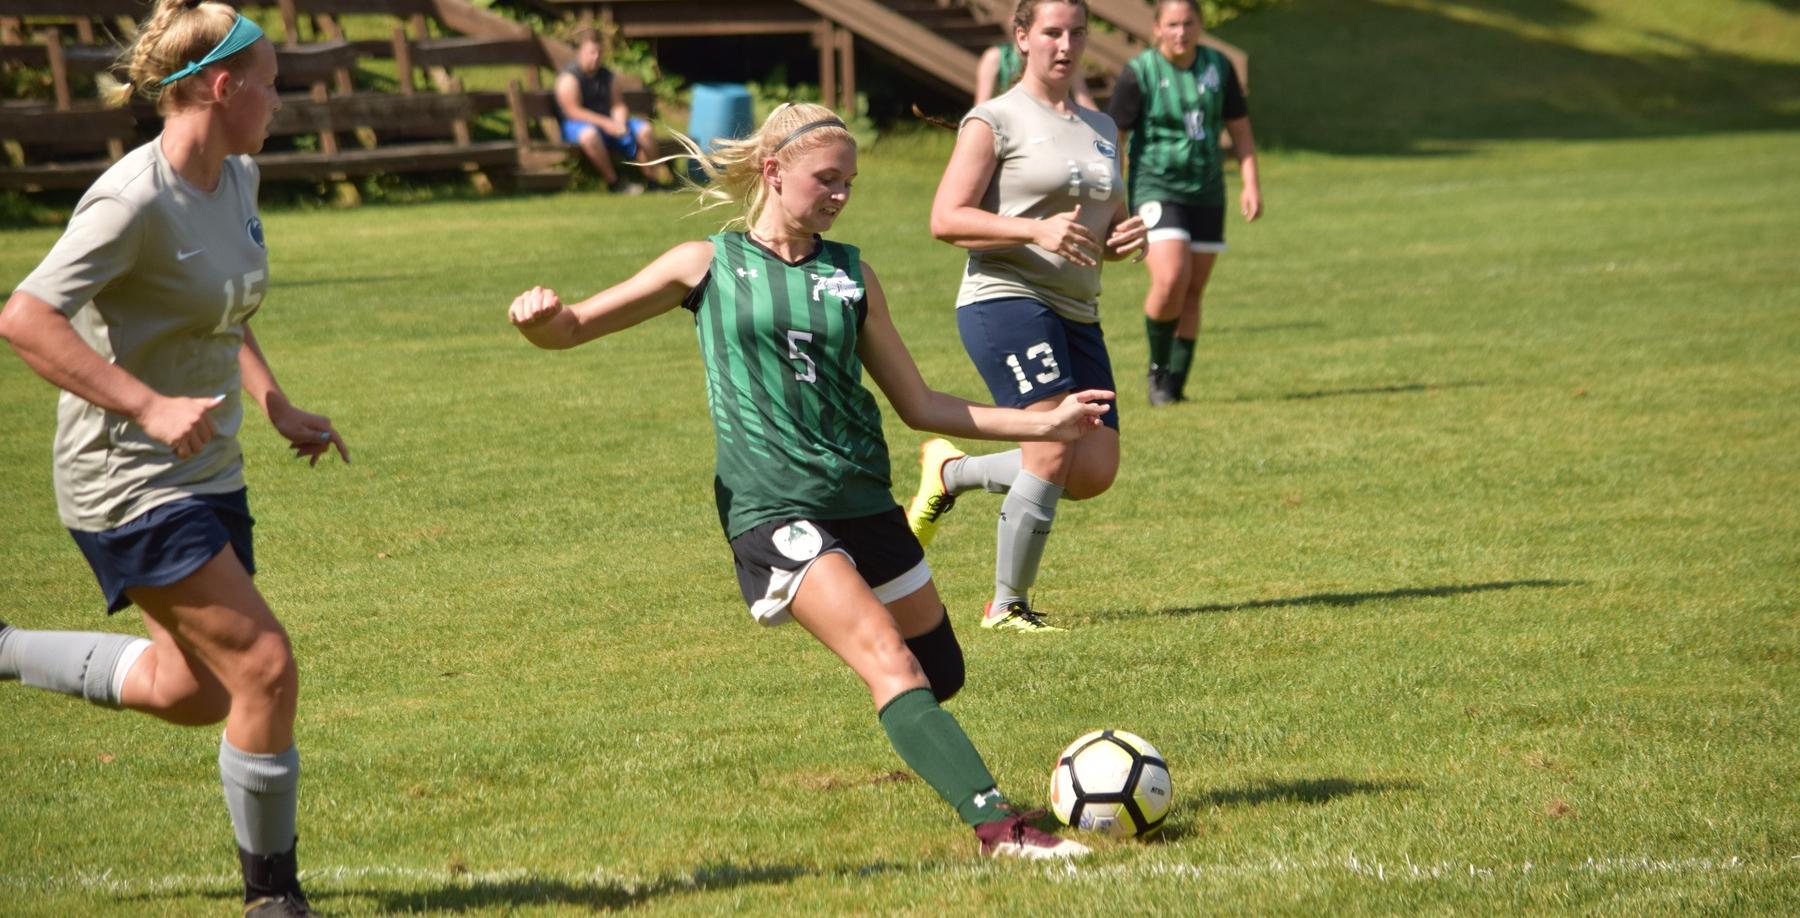 Chambers' goals lift Bison past Franciscan, 2-1